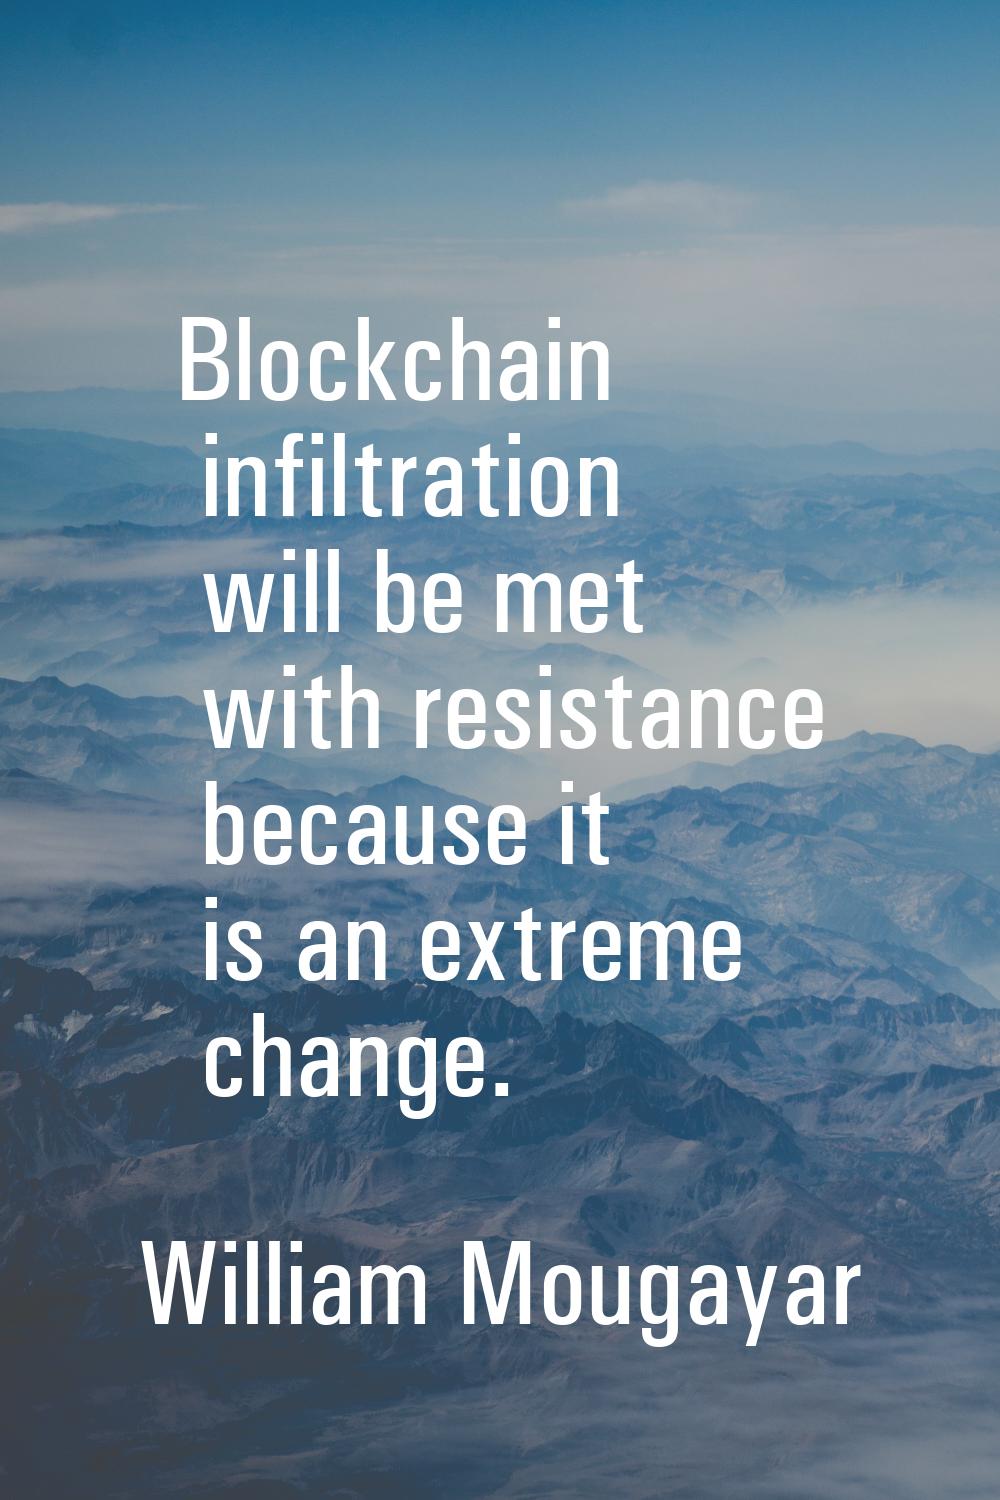 Blockchain infiltration will be met with resistance because it is an extreme change.